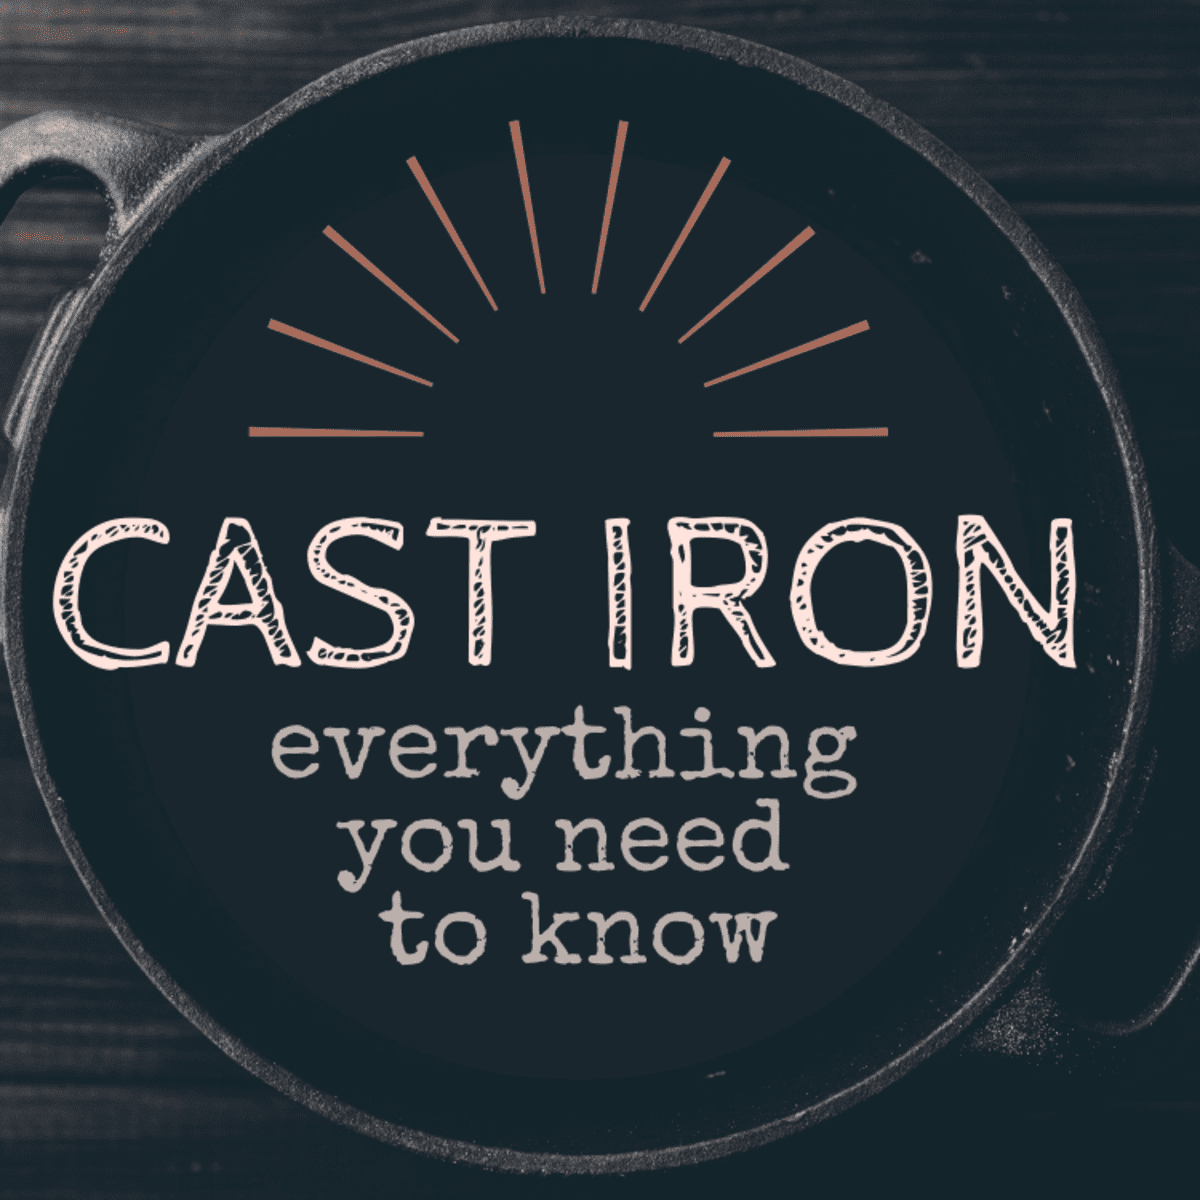 Cast Iron Skillets - Everything You Need to Know